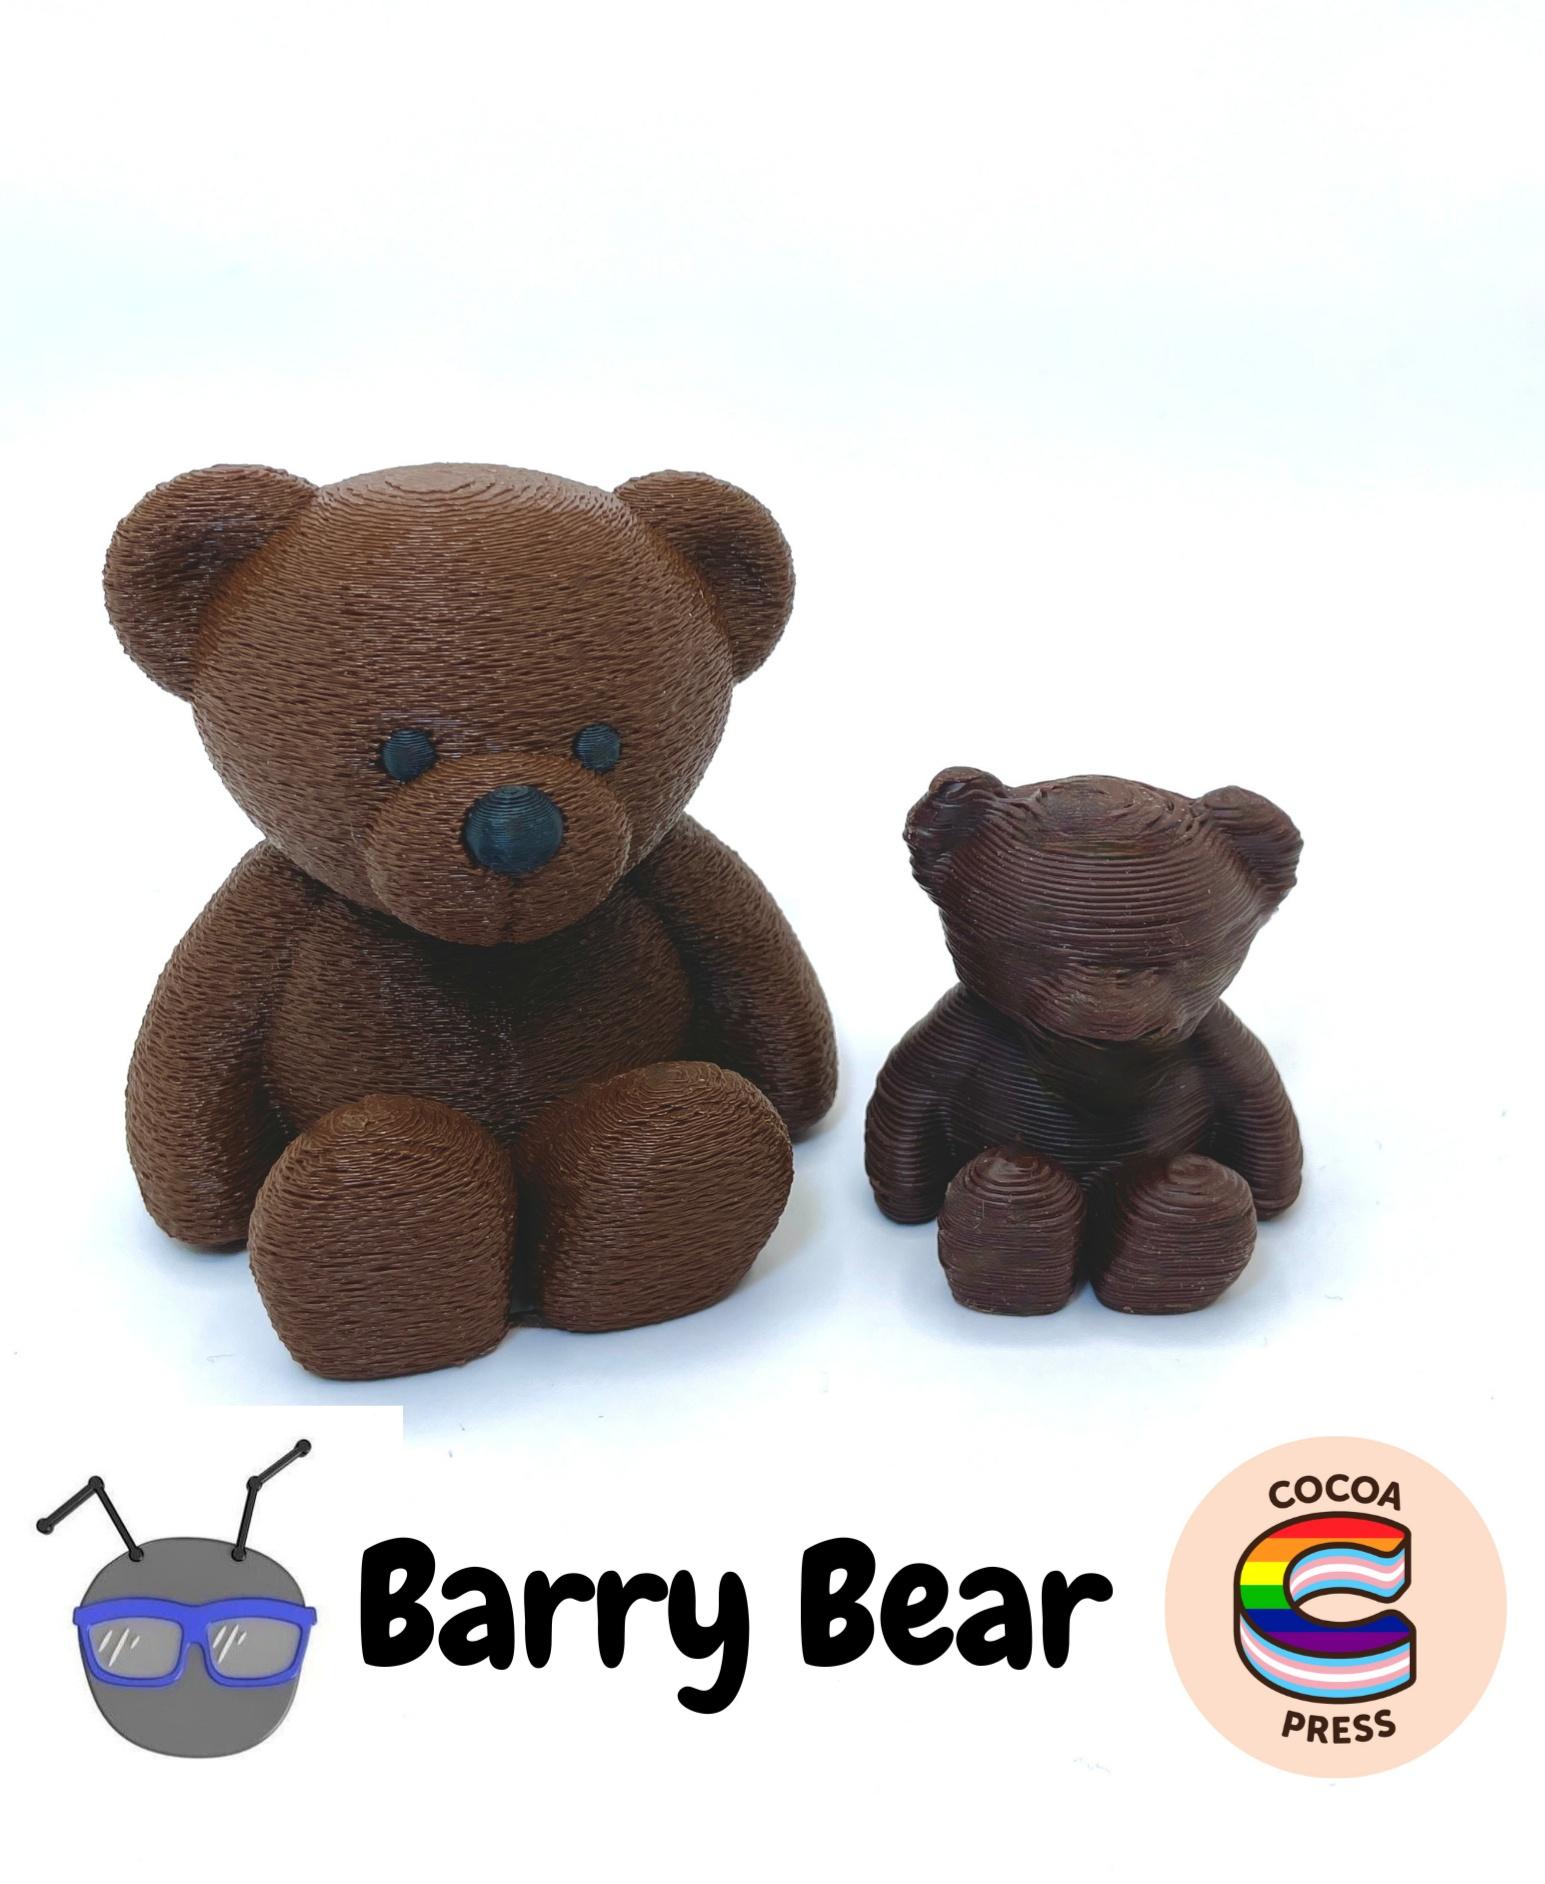 Barry Bear - One in Polymaker Brown PLA, one in Dark Chocolate! - 3d model